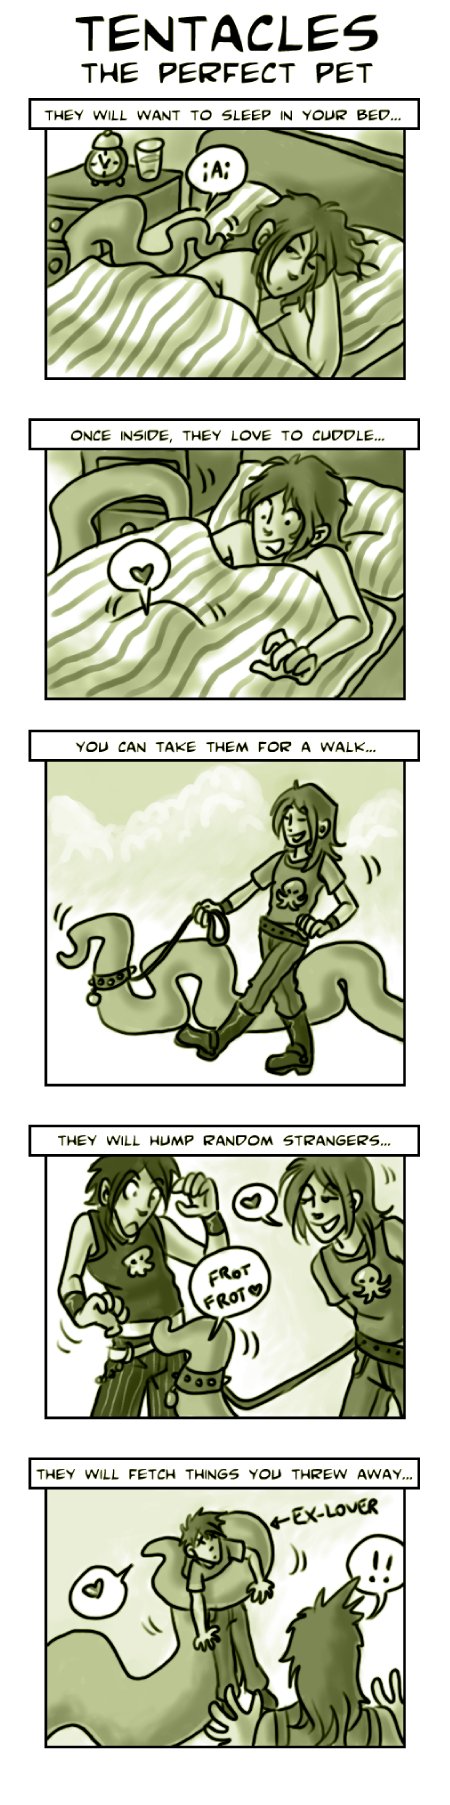 tentacles - the perfect pet